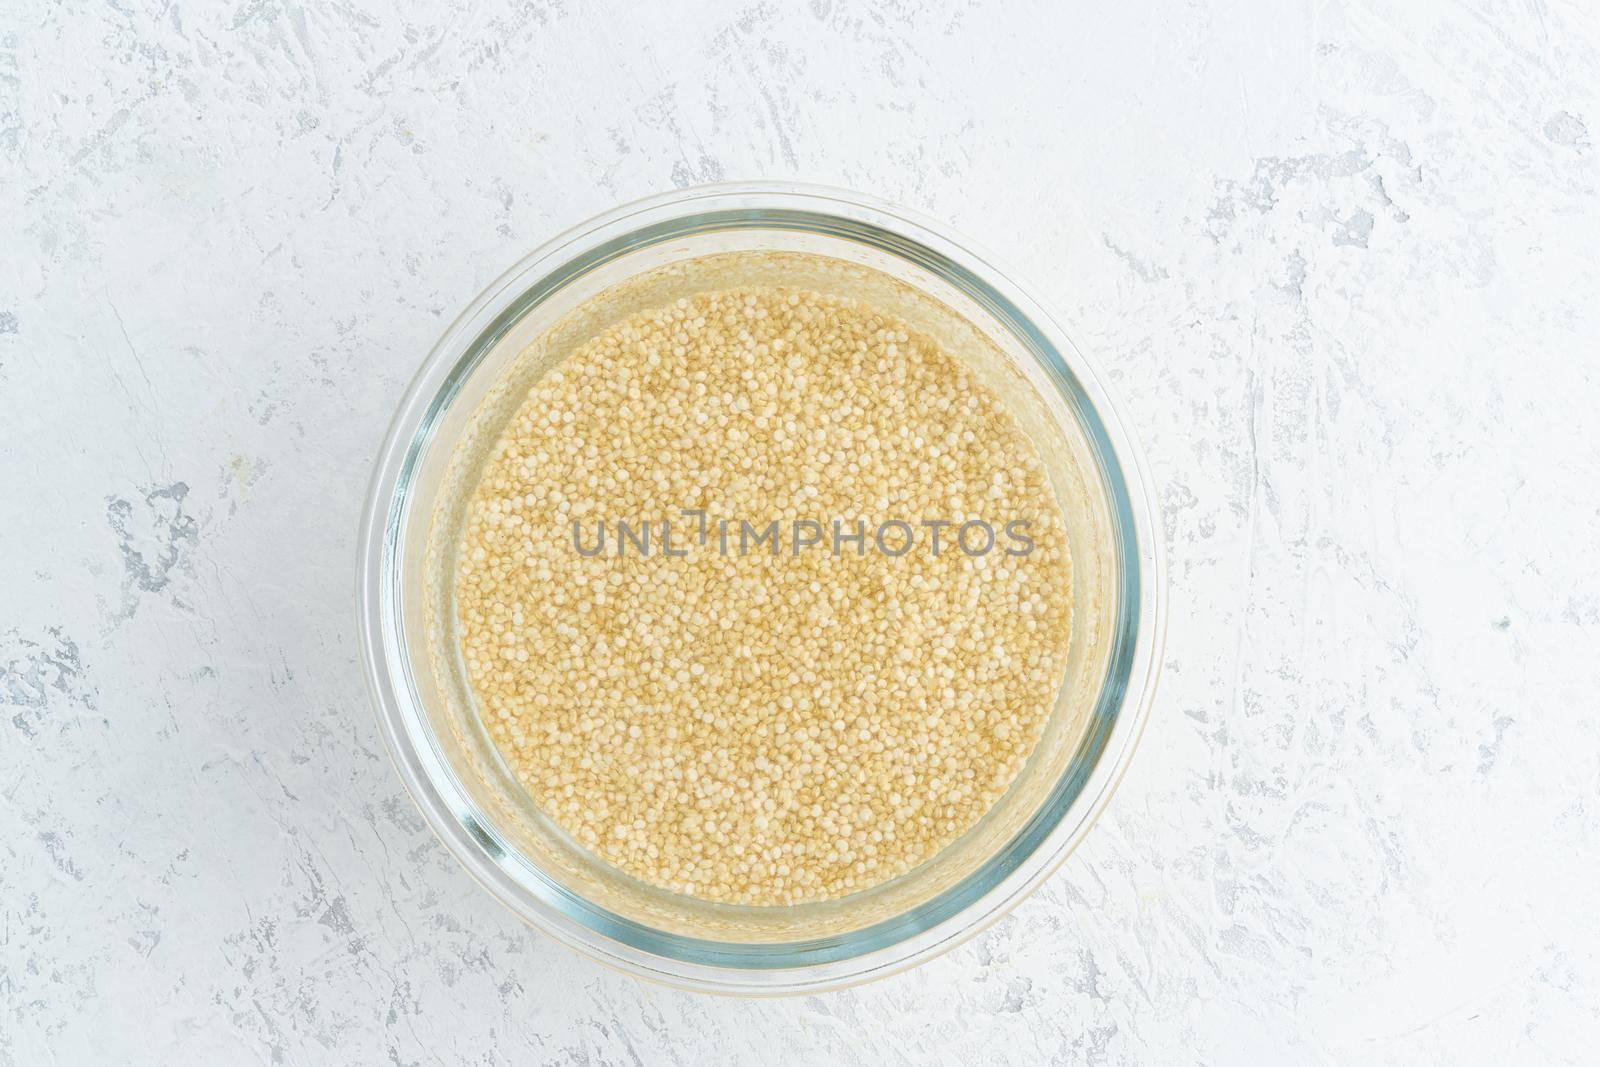 Soaking quinoa cereal in a water to ferment cereals and neutralize phytic acid. Large glass bowl with grains flooded with water. Top view, close up, white background